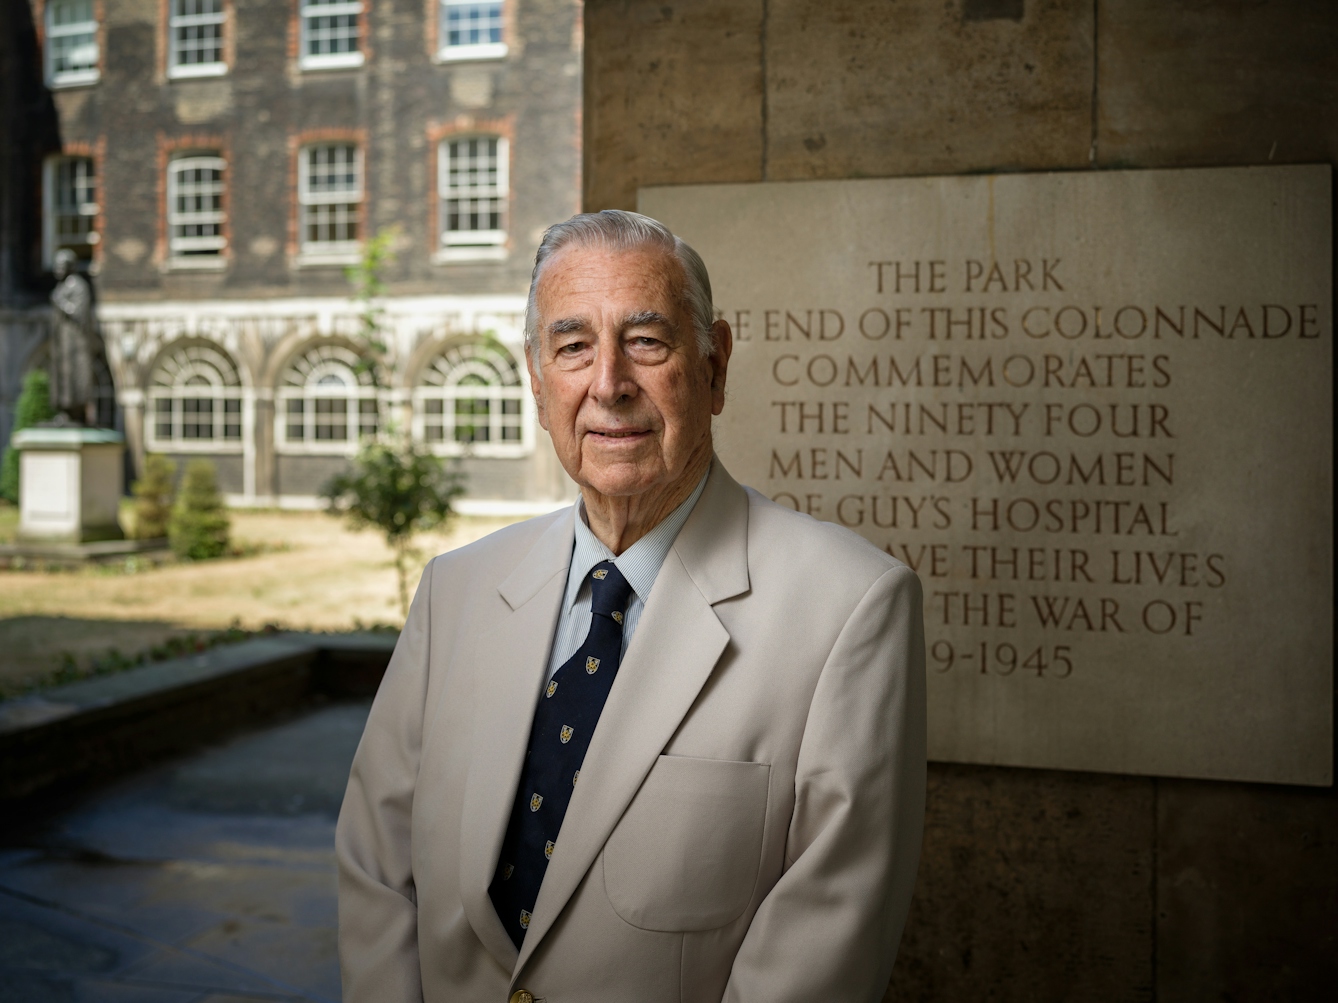 Photographic portrait of a man standing in the colonnades at Guys Hospital, London. Behind him is a stone plaque commemorating the hospital staff that lost their lives during the Second World War.